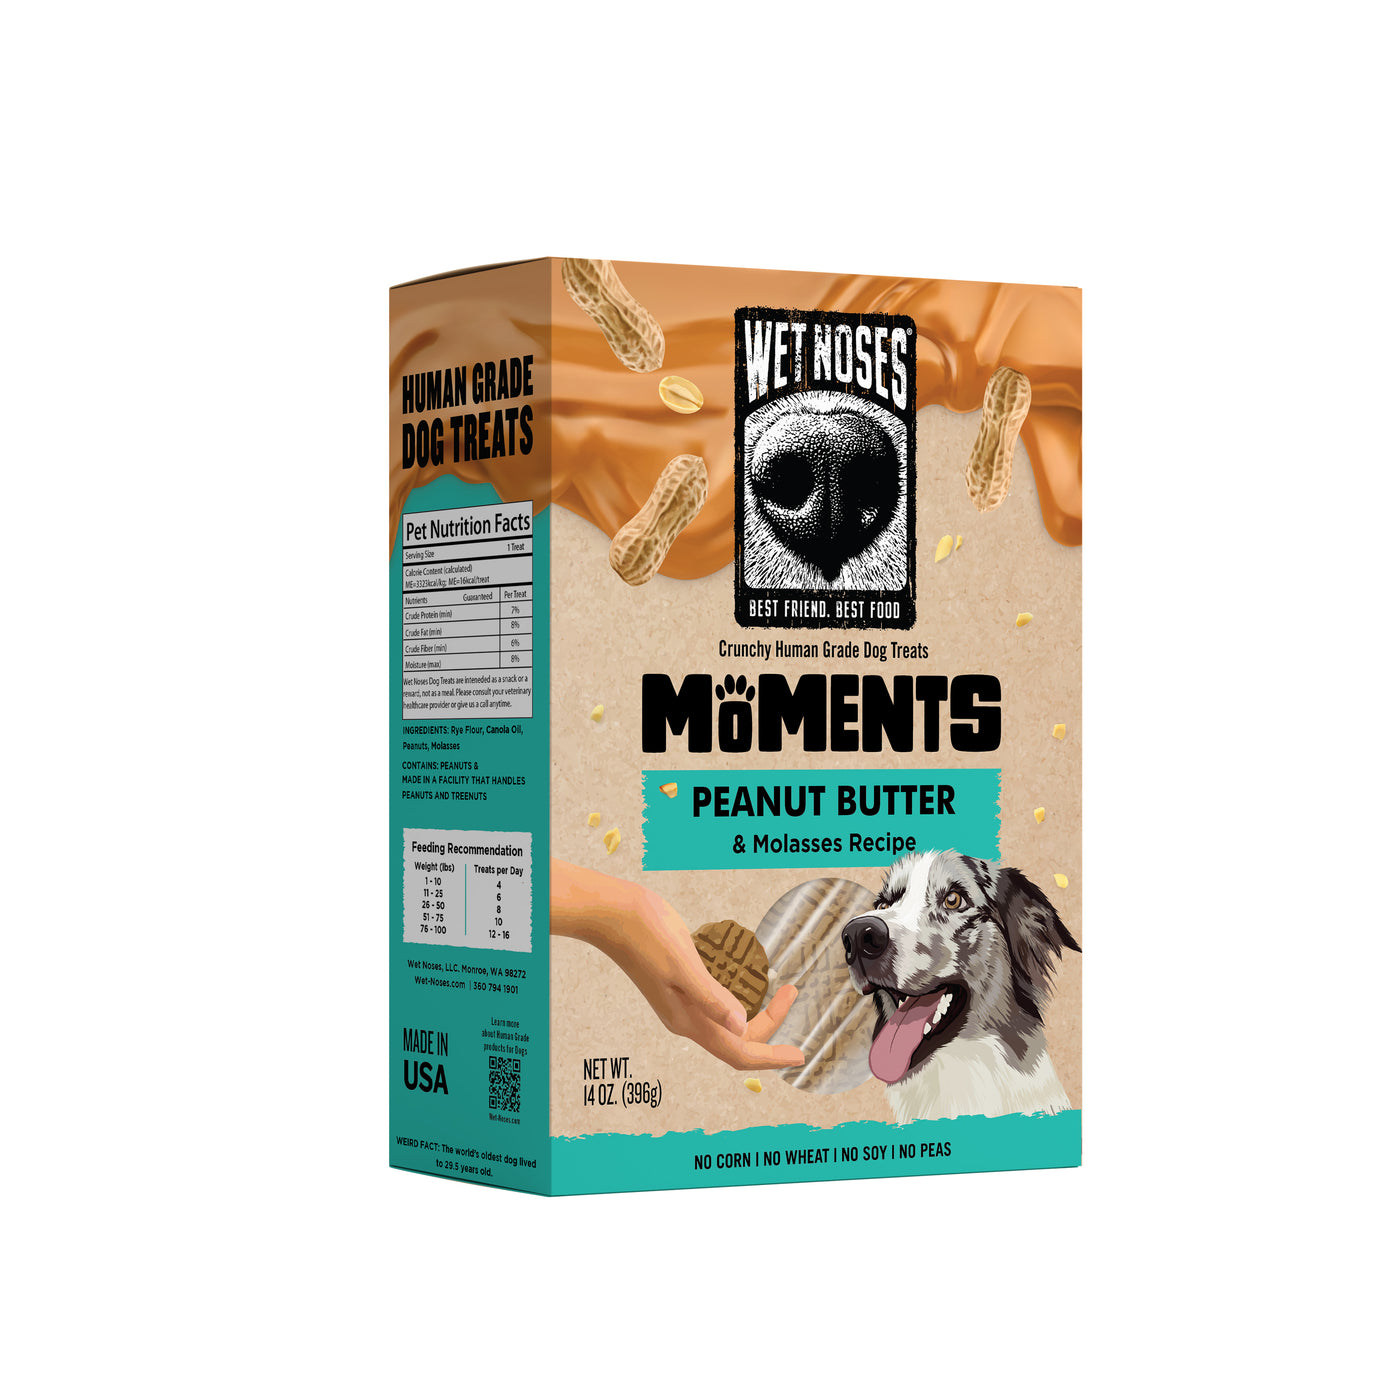 Moments Peanut Butter Homestyle 14oz - Case of 6